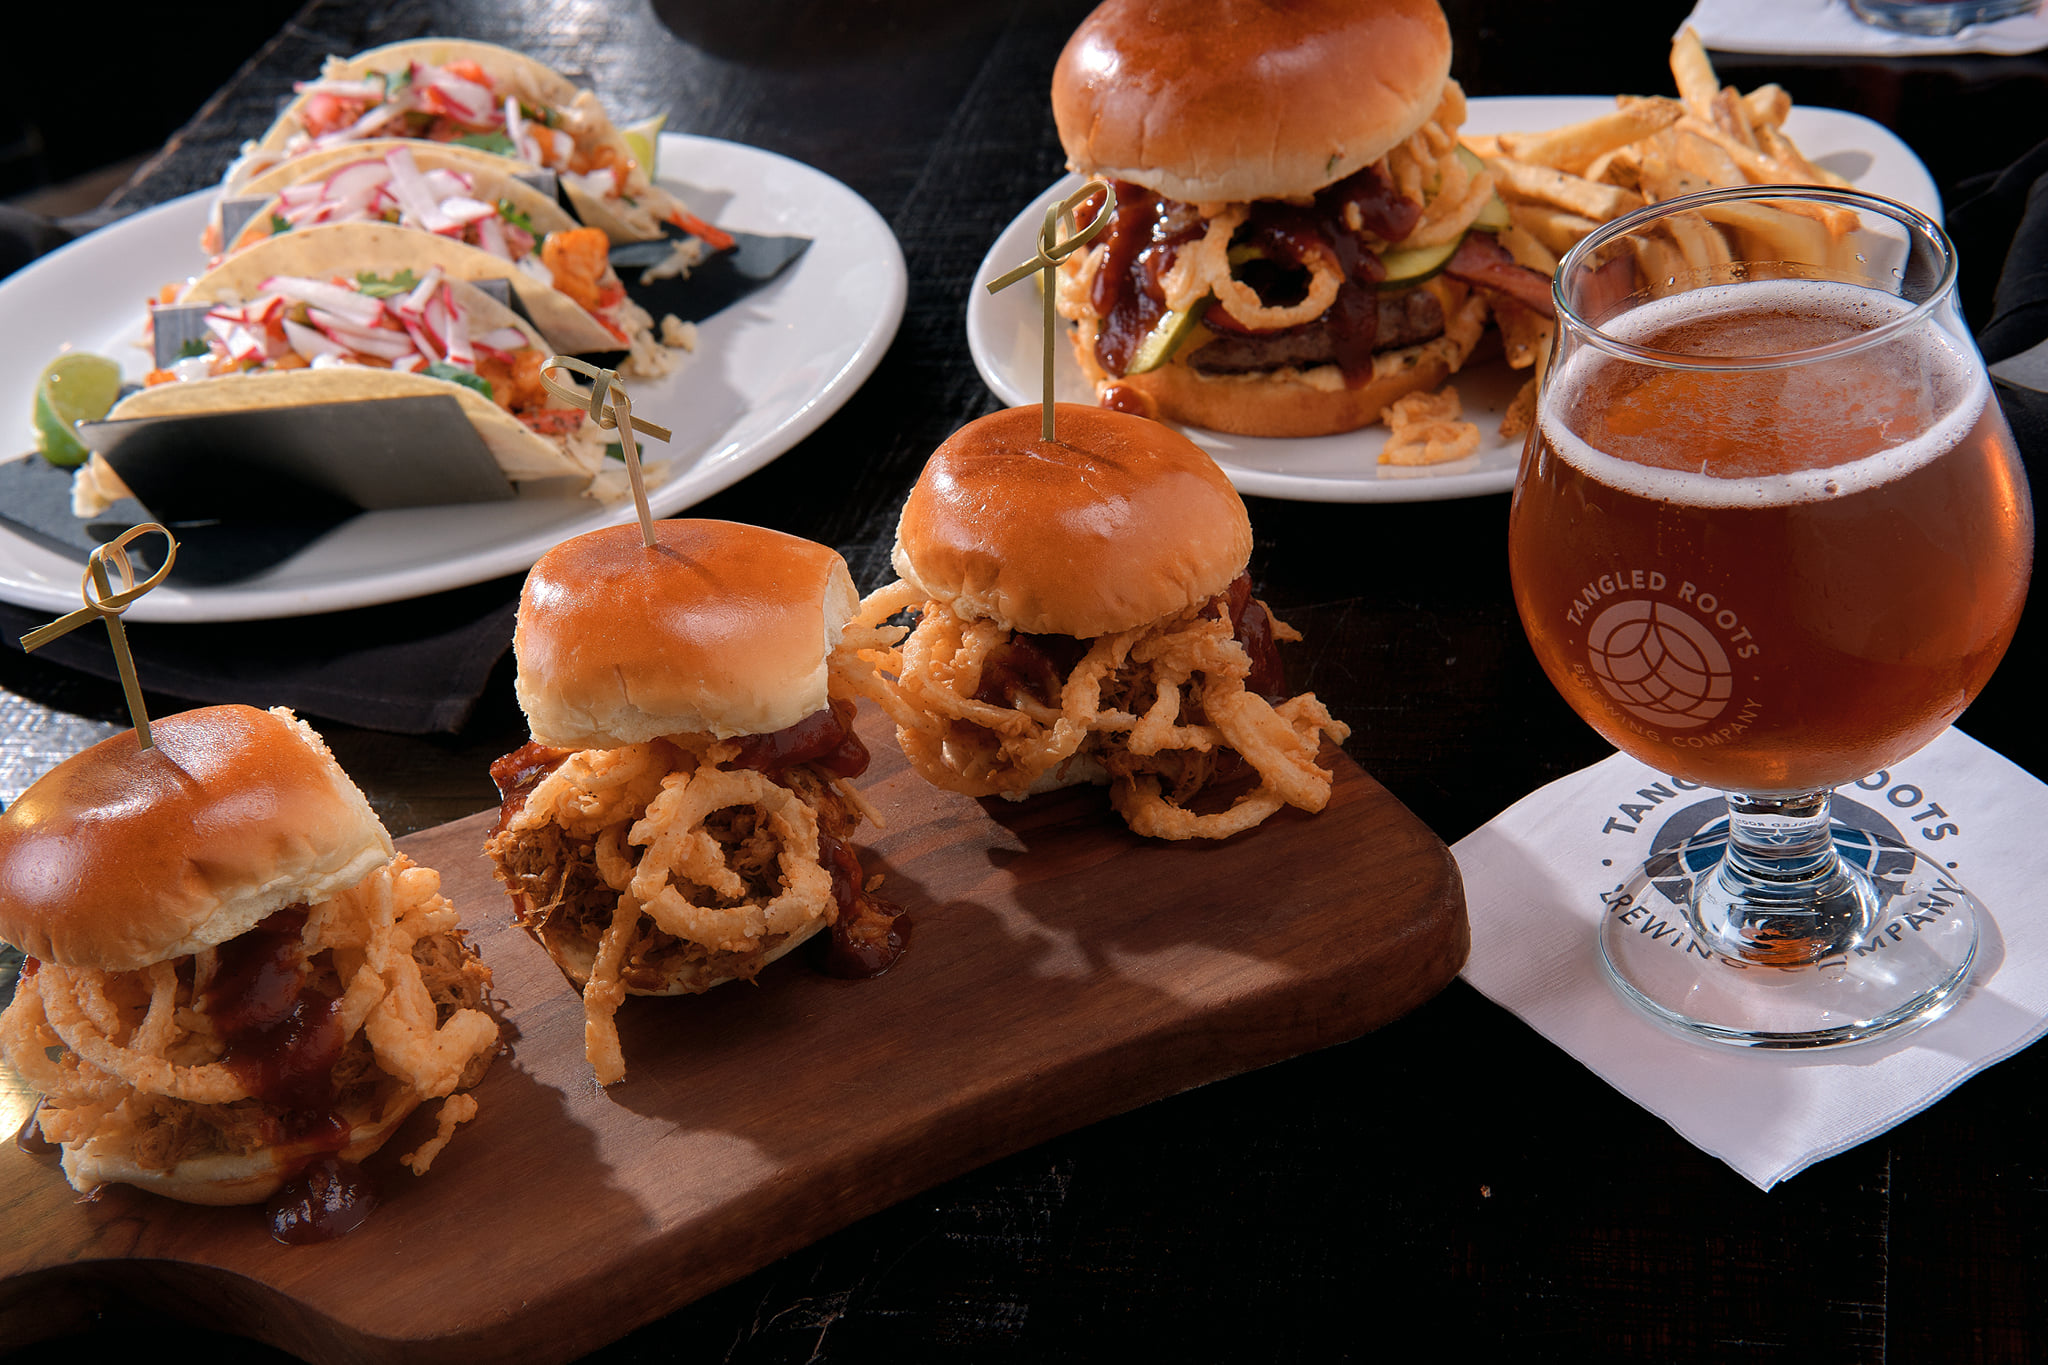 Tacos slider burgers and beer from Lone Buffalo Restaurant